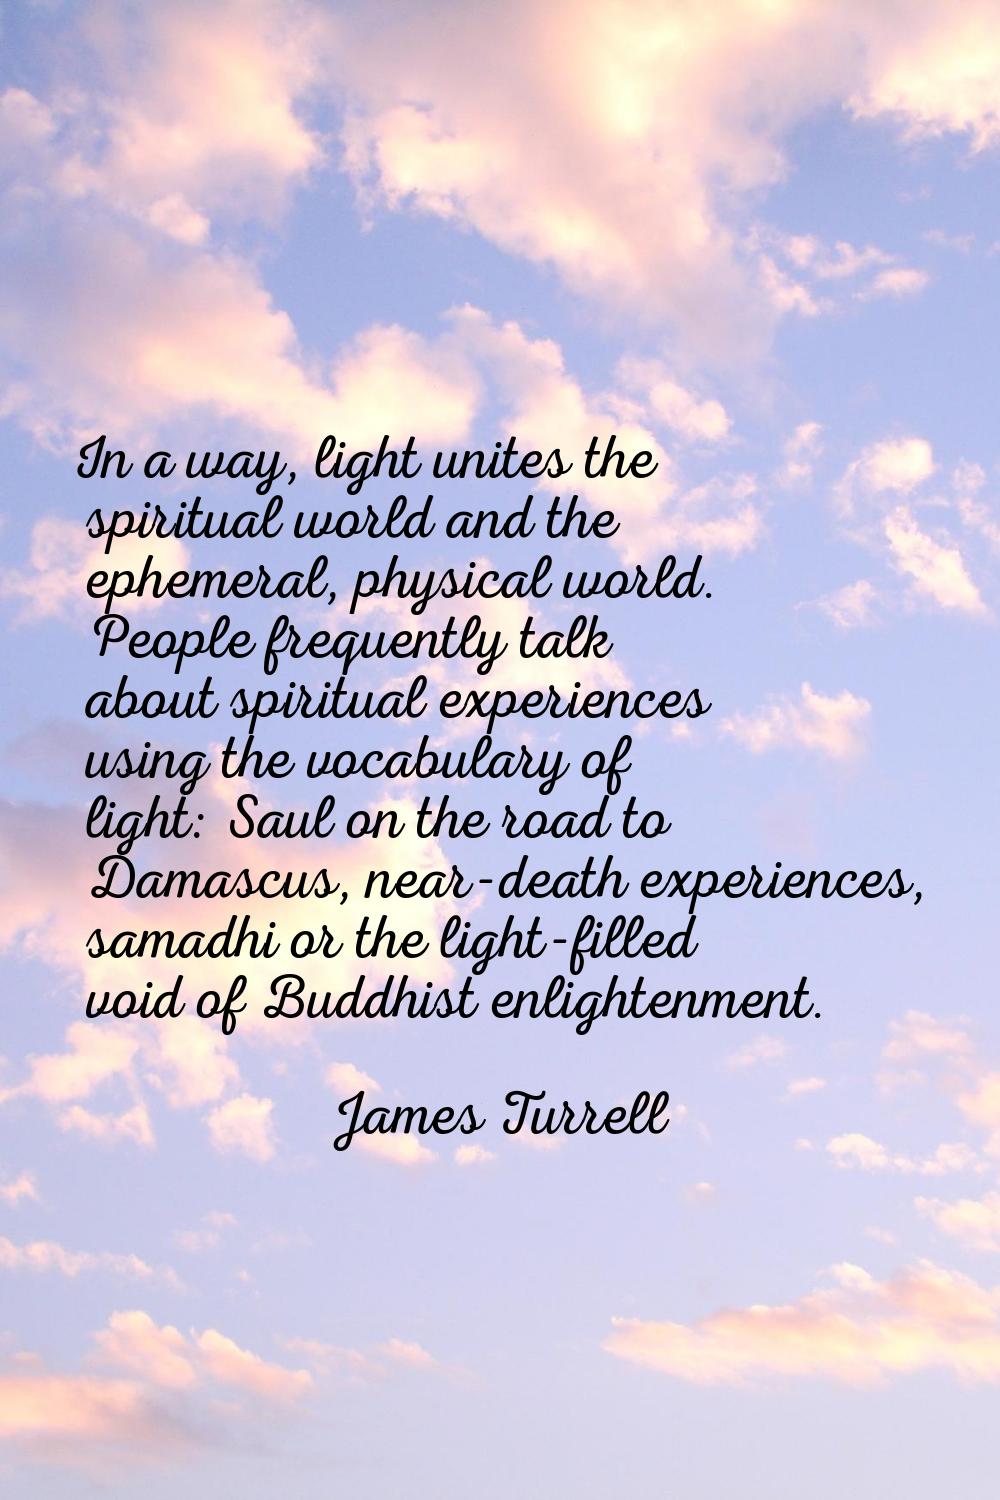 In a way, light unites the spiritual world and the ephemeral, physical world. People frequently tal